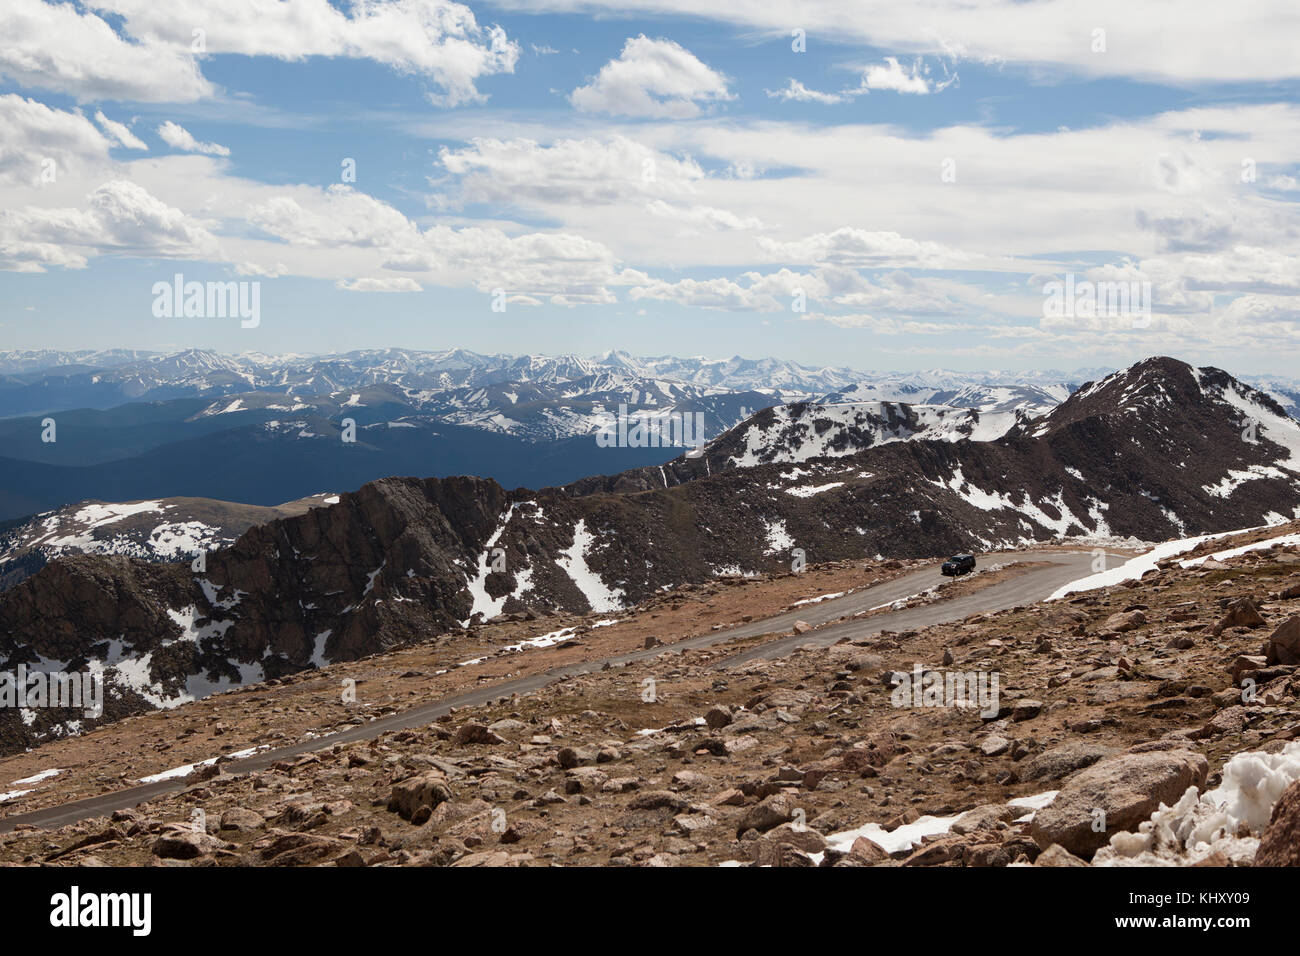 View from Mount Evans road over mountainous landscape, Colorado, USA Stock Photo